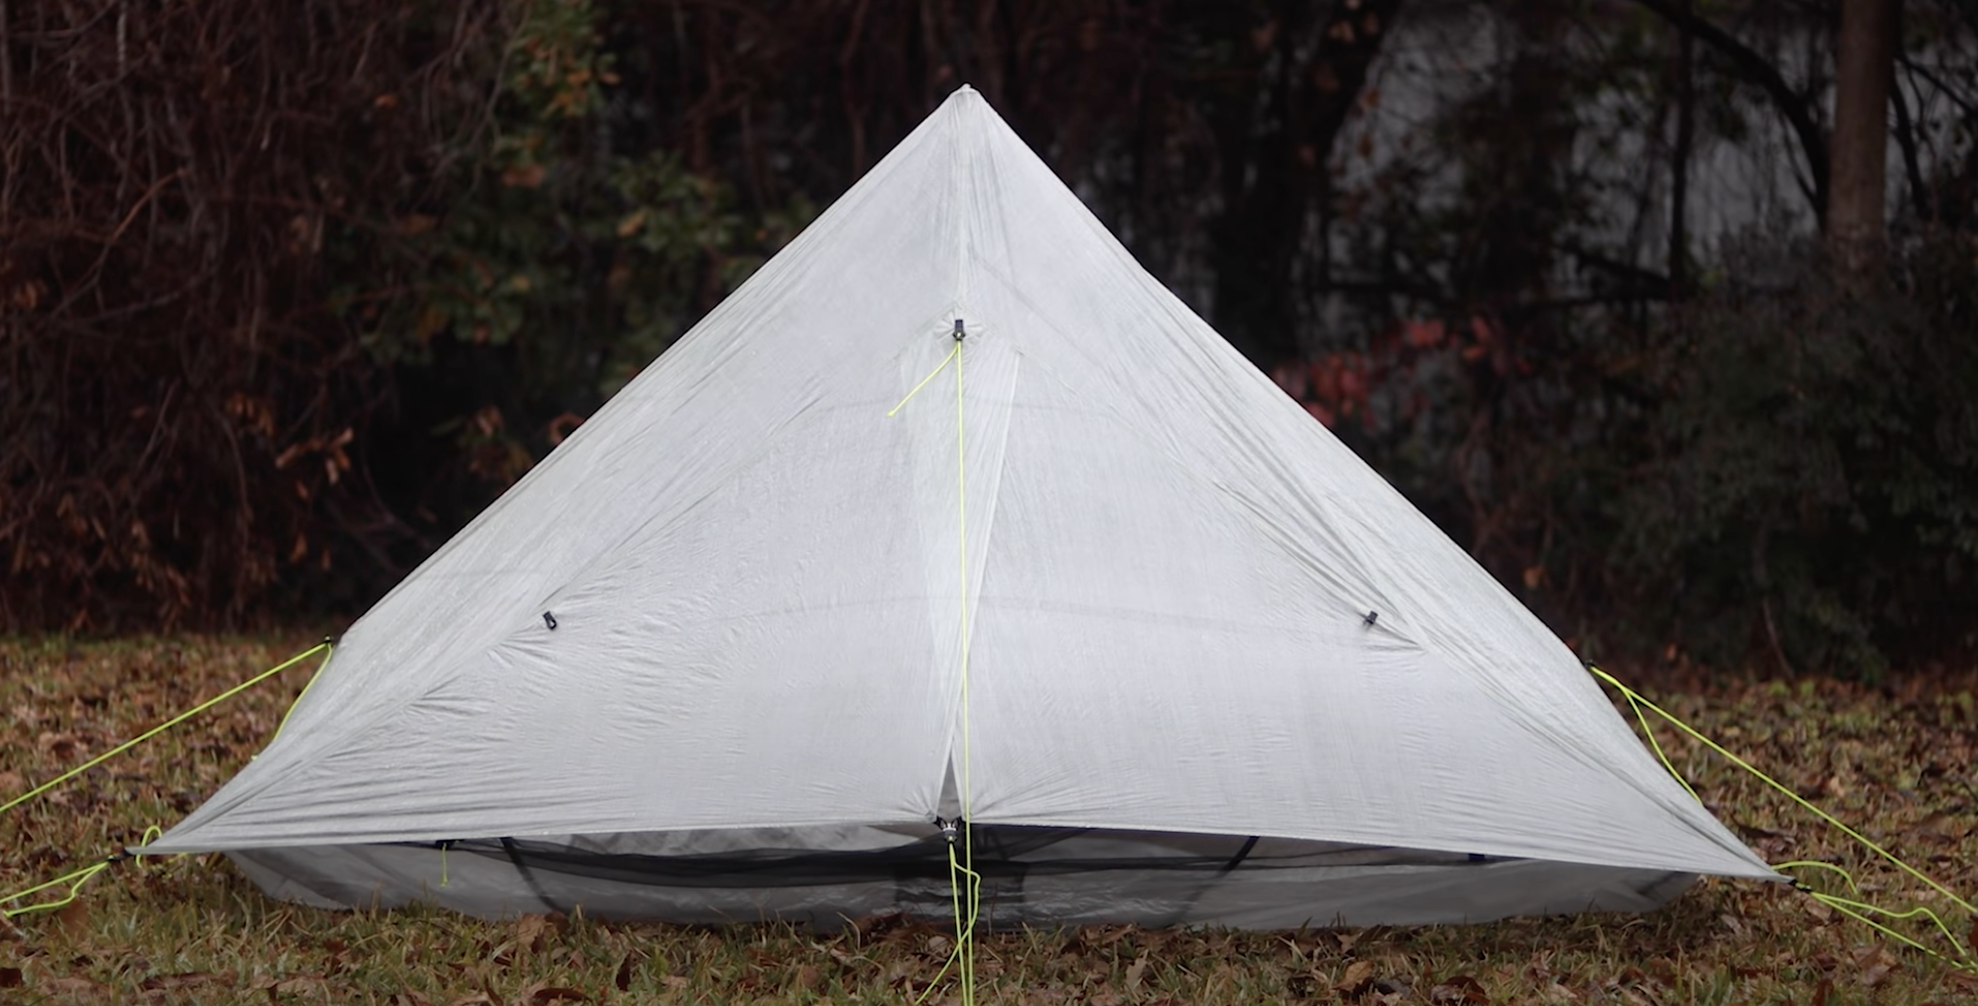 The Lightest Tent in the World – The New Zpacks Plex Solo - My 